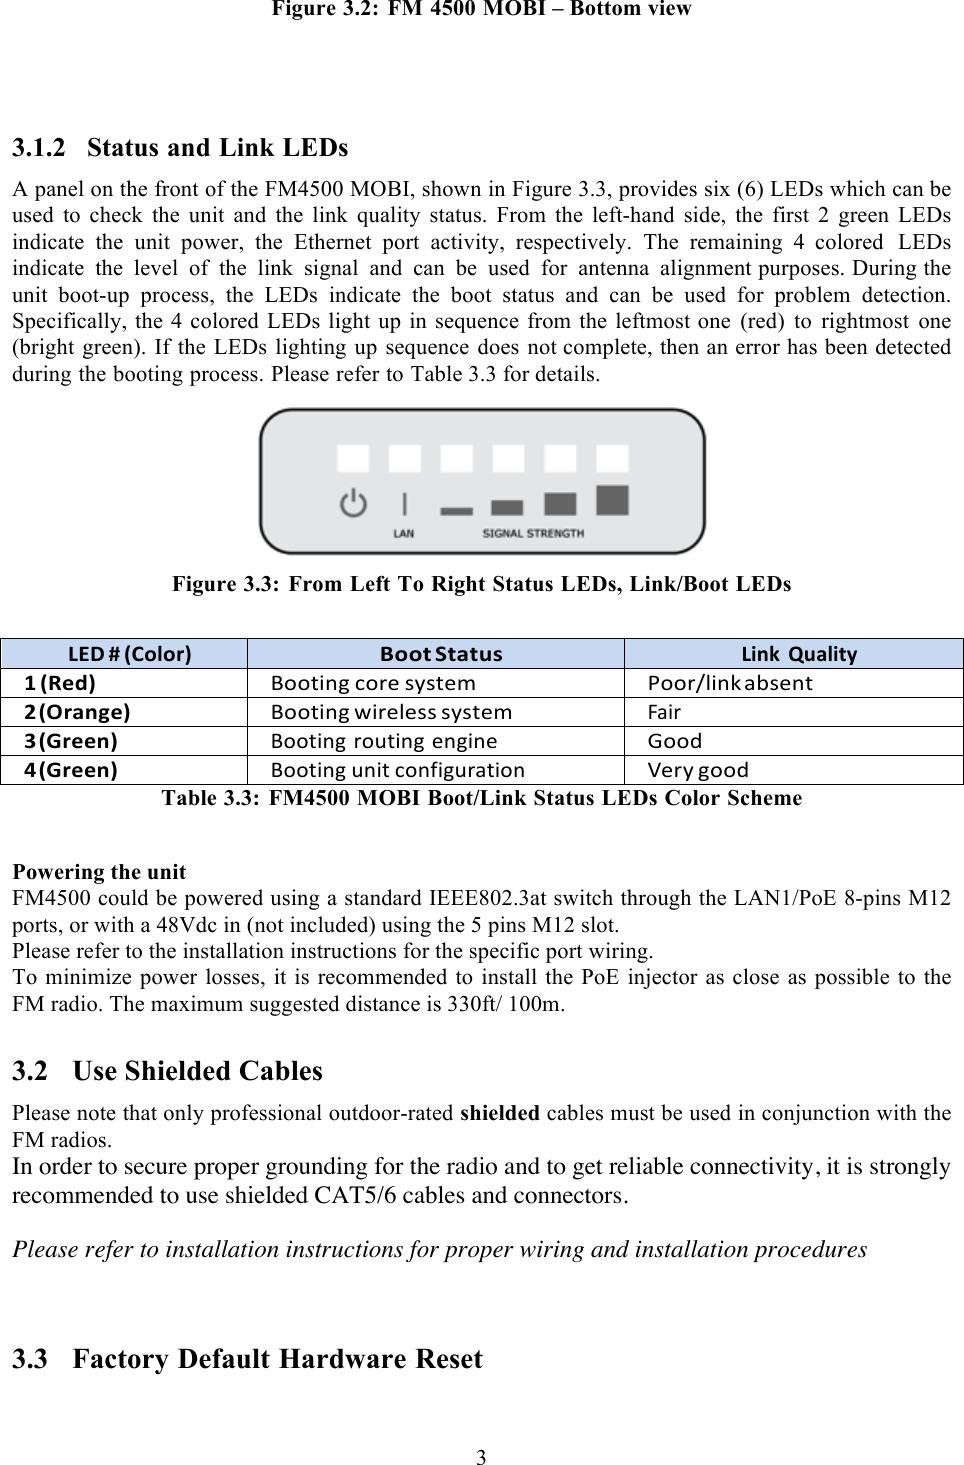  3   Figure 3.2:  FM 4500 MOBI – Bottom view   3.1.2 Status and Link LEDs A panel on the front of the FM4500 MOBI, shown in Figure 3.3, provides six (6) LEDs which can be used to  check  the  unit and the  link quality status. From  the  left-hand side,  the  first 2  green  LEDs indicate the unit power, the Ethernet port activity, respectively. The remaining 4  colored LEDs indicate the level of the link signal and can be used for antenna alignment purposes. During the unit boot-up process, the LEDs indicate the boot status and can be used  for problem detection. Specifically, the 4 colored LEDs light up in sequence from the leftmost one (red) to rightmost one (bright green). If the LEDs lighting up sequence does not complete, then an error has been detected during the booting process. Please refer to Table 3.3 for details.    Figure 3.3:  From Left To Right Status LEDs, Link/Boot LEDs  LED$#$(Color)!Boot$Status!Link$Quality!1$(Red)!&quot;##$%&amp;&apos;!(#)*!+,+$*-!.##)/0%&amp;1!23+*&amp;$!2$(Orange)!&quot;##$%&amp;&apos;!4%)*0*++!+,+$*-!52%)!3$(Green)!&quot;##$%&amp;&apos;!)#6$%&amp;&apos;!*&amp;&apos;%&amp;*!7##8!4$(Green)!&quot;##$%&amp;&apos;!6&amp;%$!(#&amp;9%&apos;6)2$%#&amp;!:*),!&apos;##8!Table 3.3: FM4500 MOBI Boot/Link Status LEDs Color Scheme  Powering the unit FM4500 could be powered using a standard IEEE802.3at switch through the LAN1/PoE 8-pins M12 ports, or with a 48Vdc in (not included) using the 5 pins M12 slot.  Please refer to the installation instructions for the specific port wiring. To minimize power losses, it is recommended to install the PoE injector as close as possible to the FM radio. The maximum suggested distance is 330ft/ 100m. 3.2 Use Shielded Cables Please note that only professional outdoor-rated shielded cables must be used in conjunction with the FM radios.  In order to secure proper grounding for the radio and to get reliable connectivity, it is strongly recommended to use shielded CAT5/6 cables and connectors. Please refer to installation instructions for proper wiring and installation procedures  3.3 Factory Default Hardware Reset  